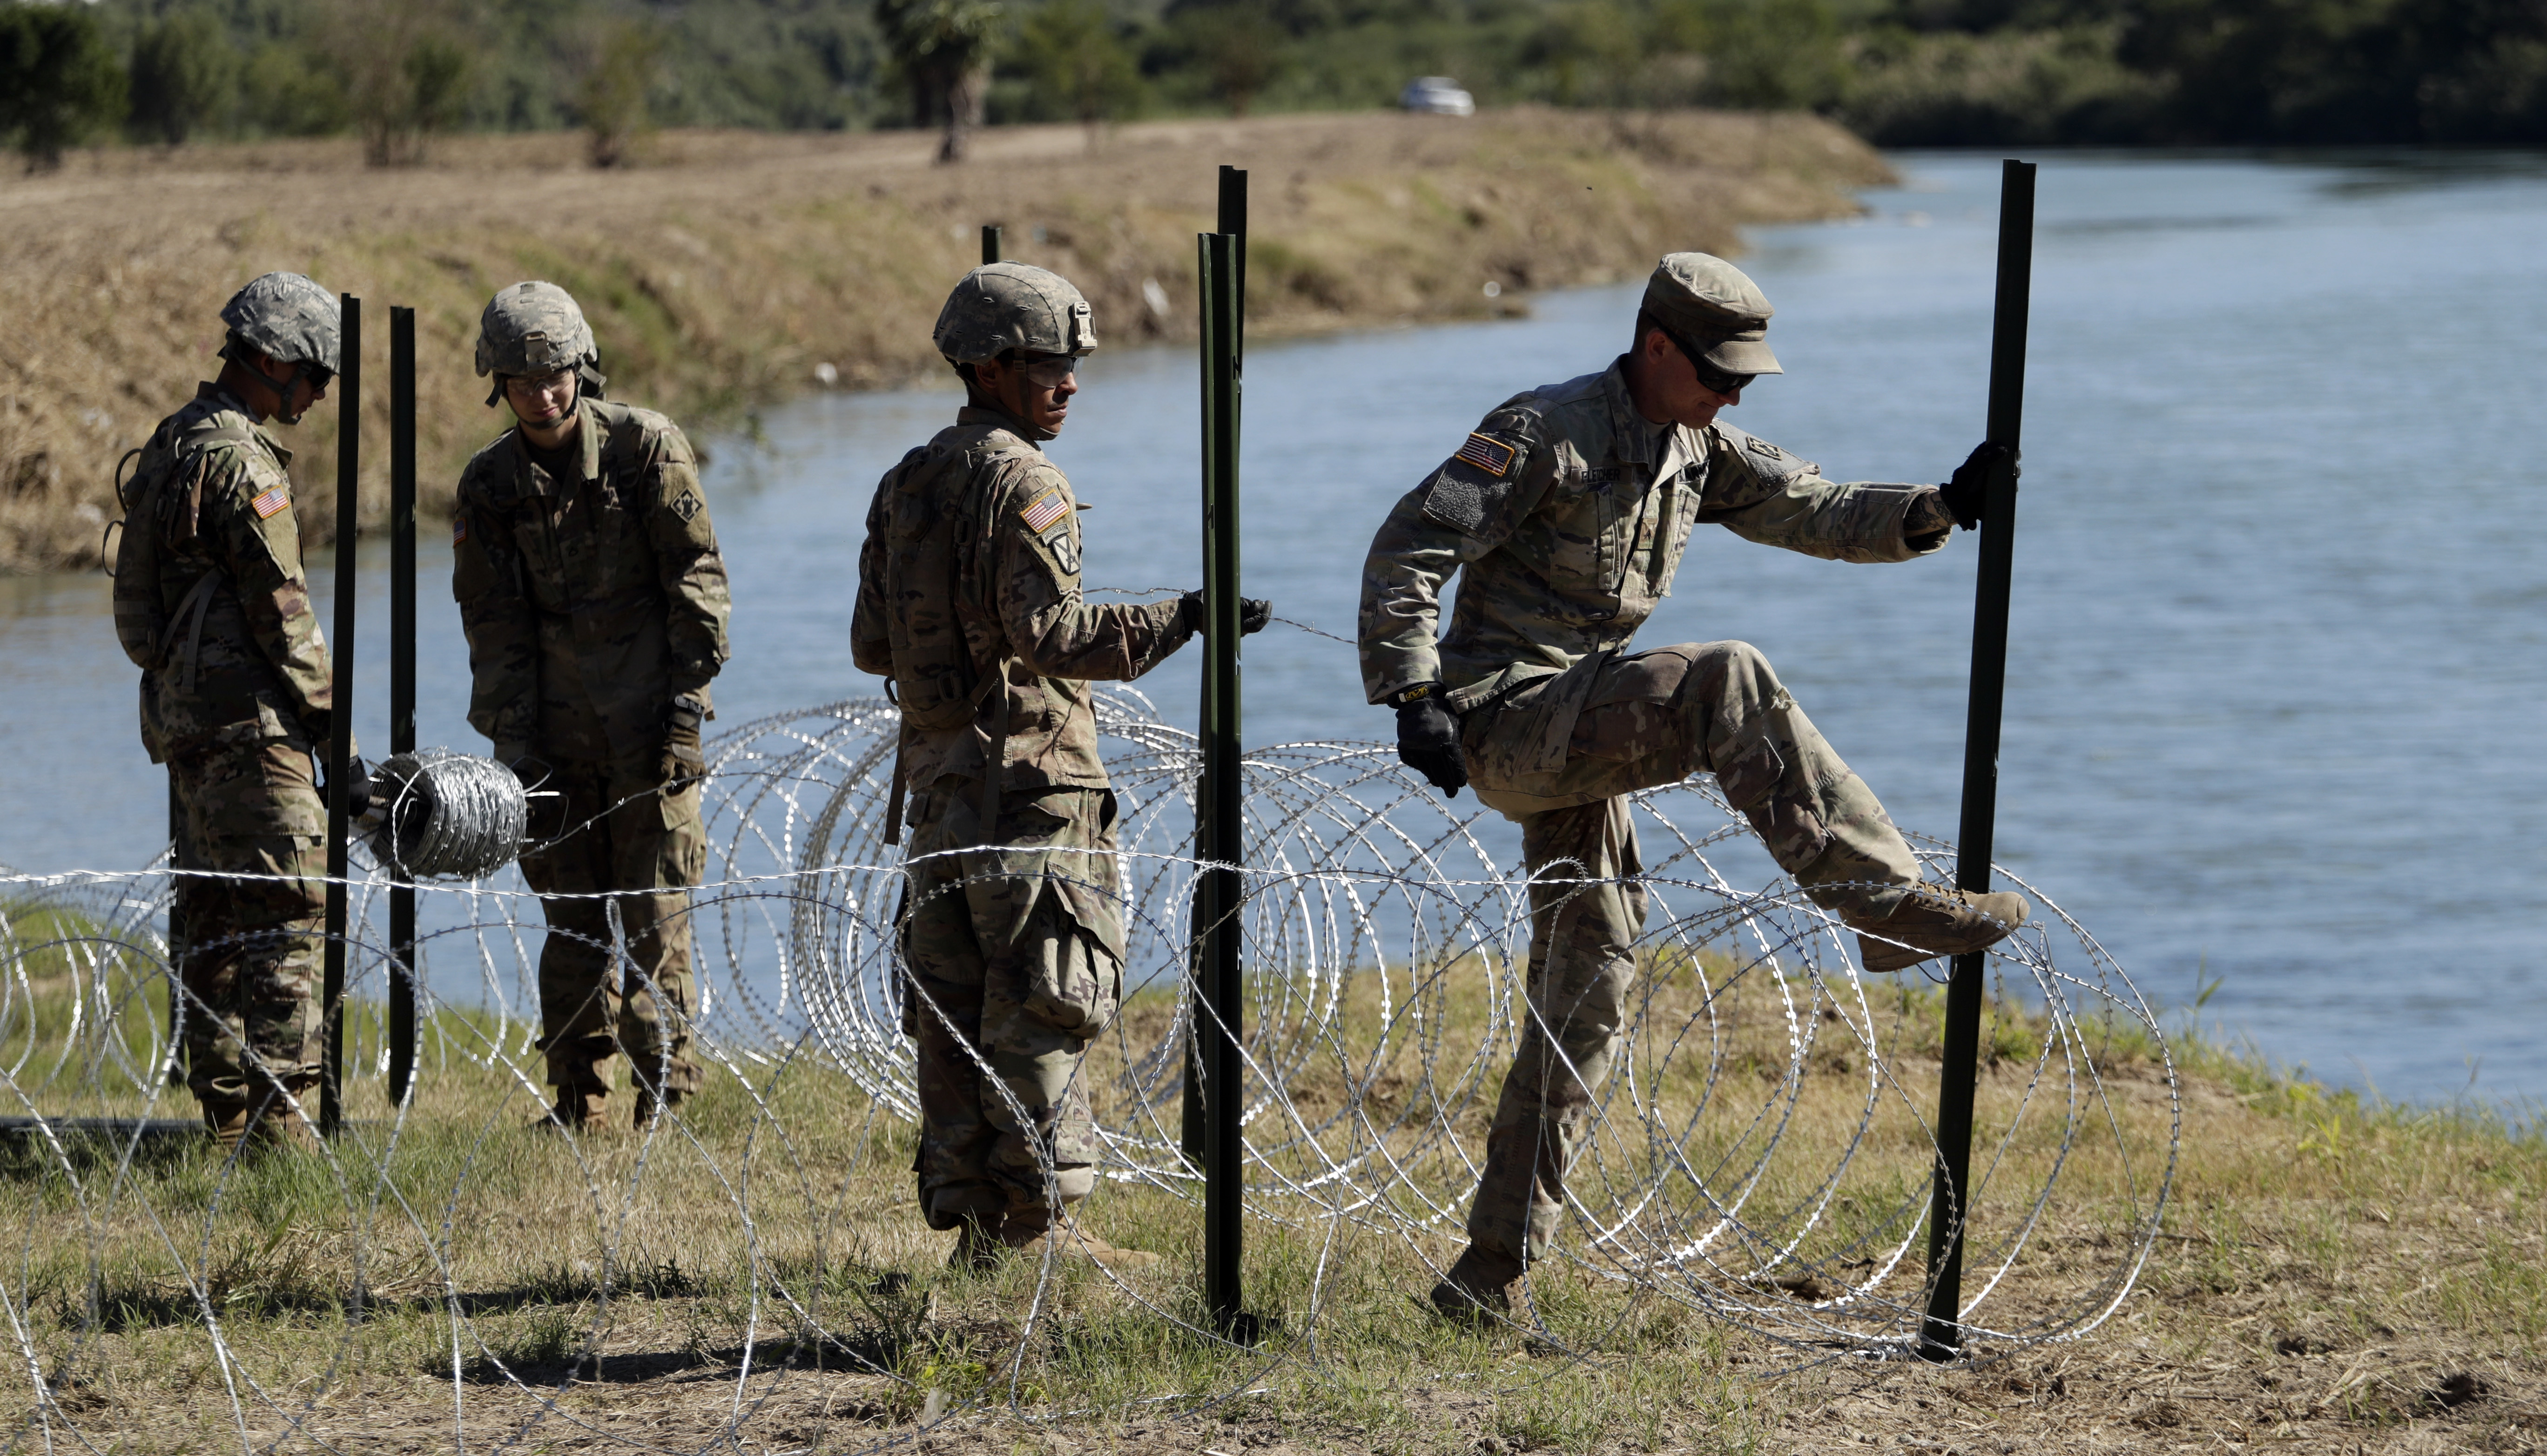 Not guns, concertina wire and metal bars to greet central American caravan trying to enter US